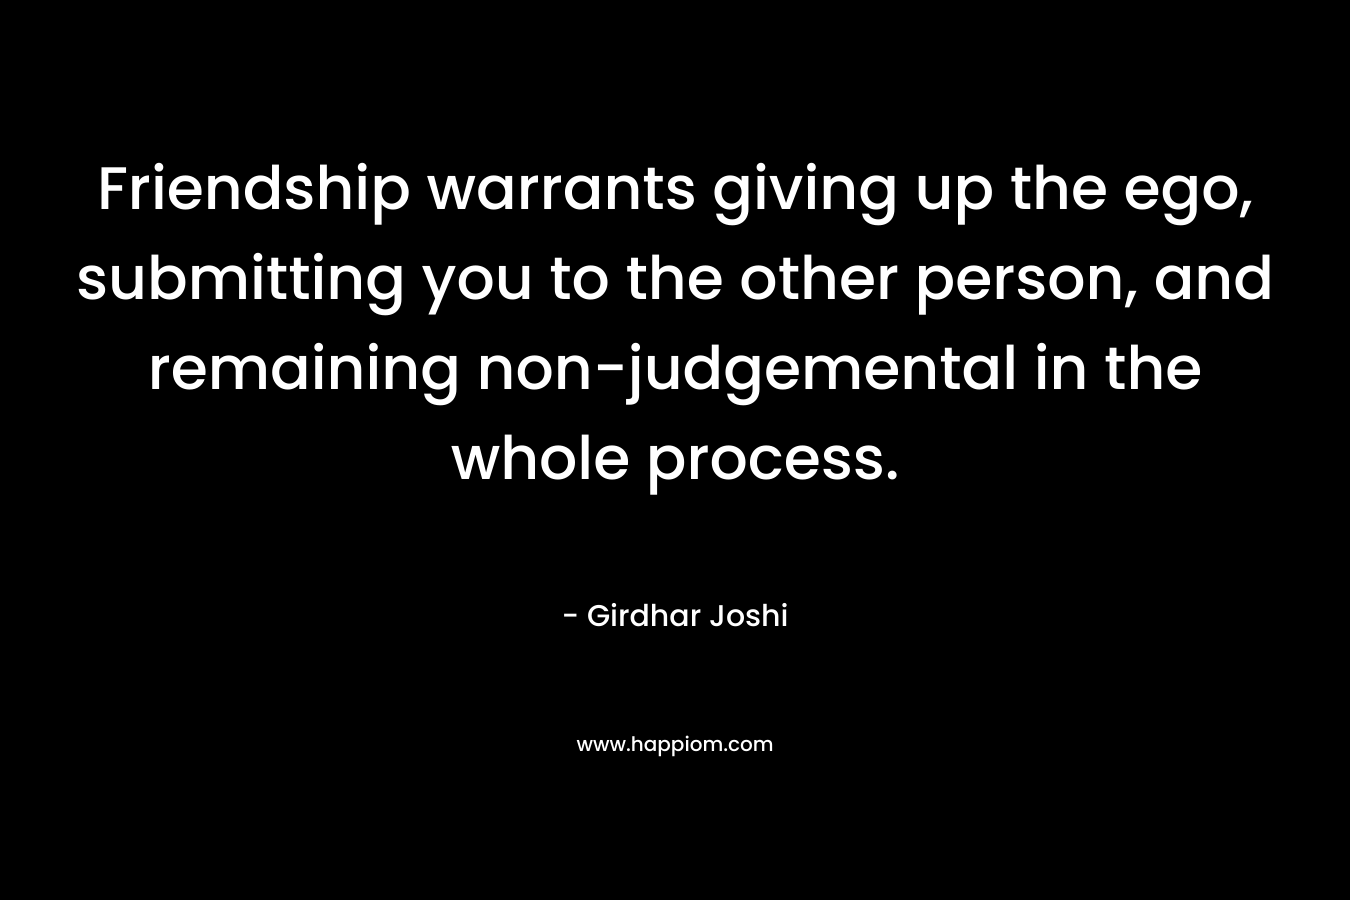 Friendship warrants giving up the ego, submitting you to the other person, and remaining non-judgemental in the whole process. – Girdhar Joshi